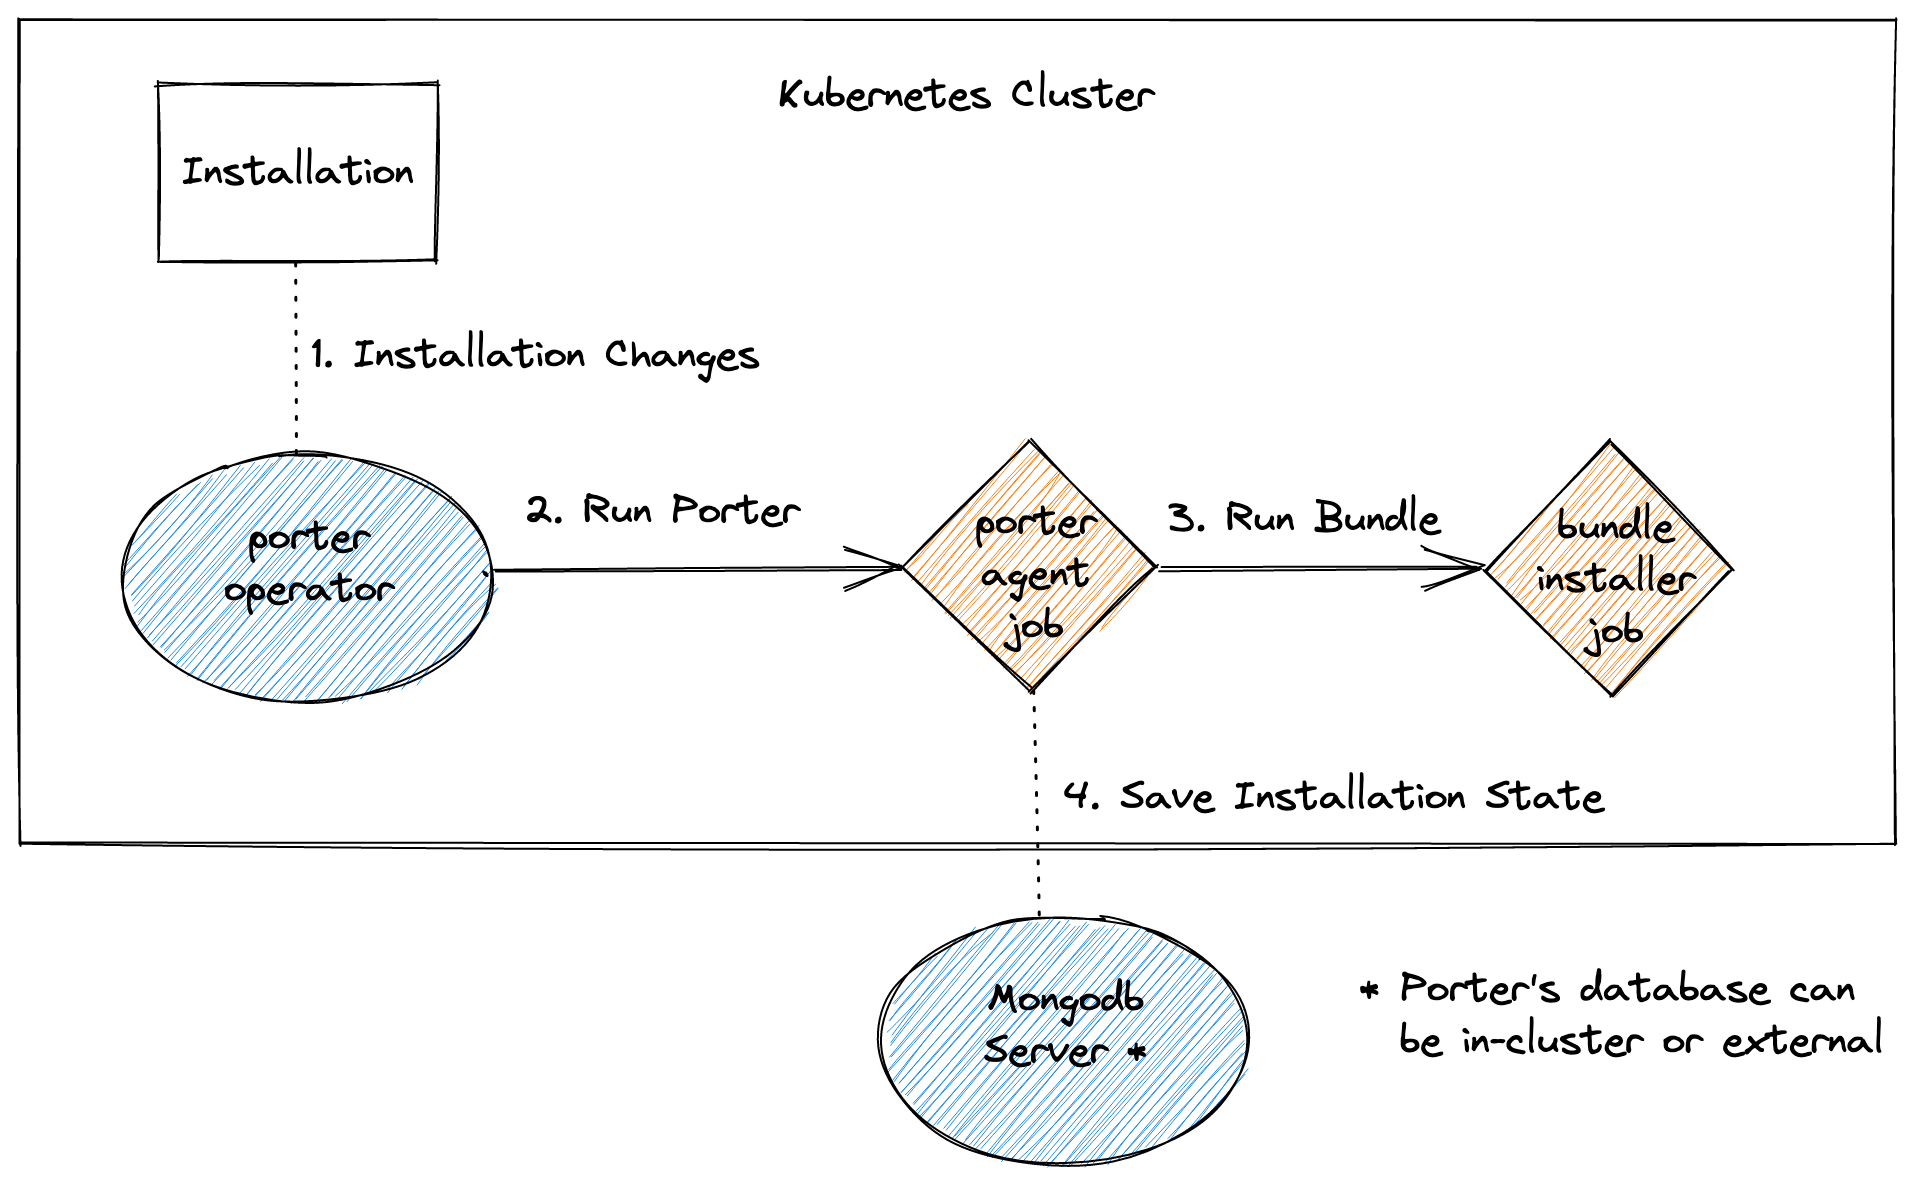 architectural diagram showing that an installation resource triggers the operator to run a porter agent job, which then runs the bundle, saving state in mongodb